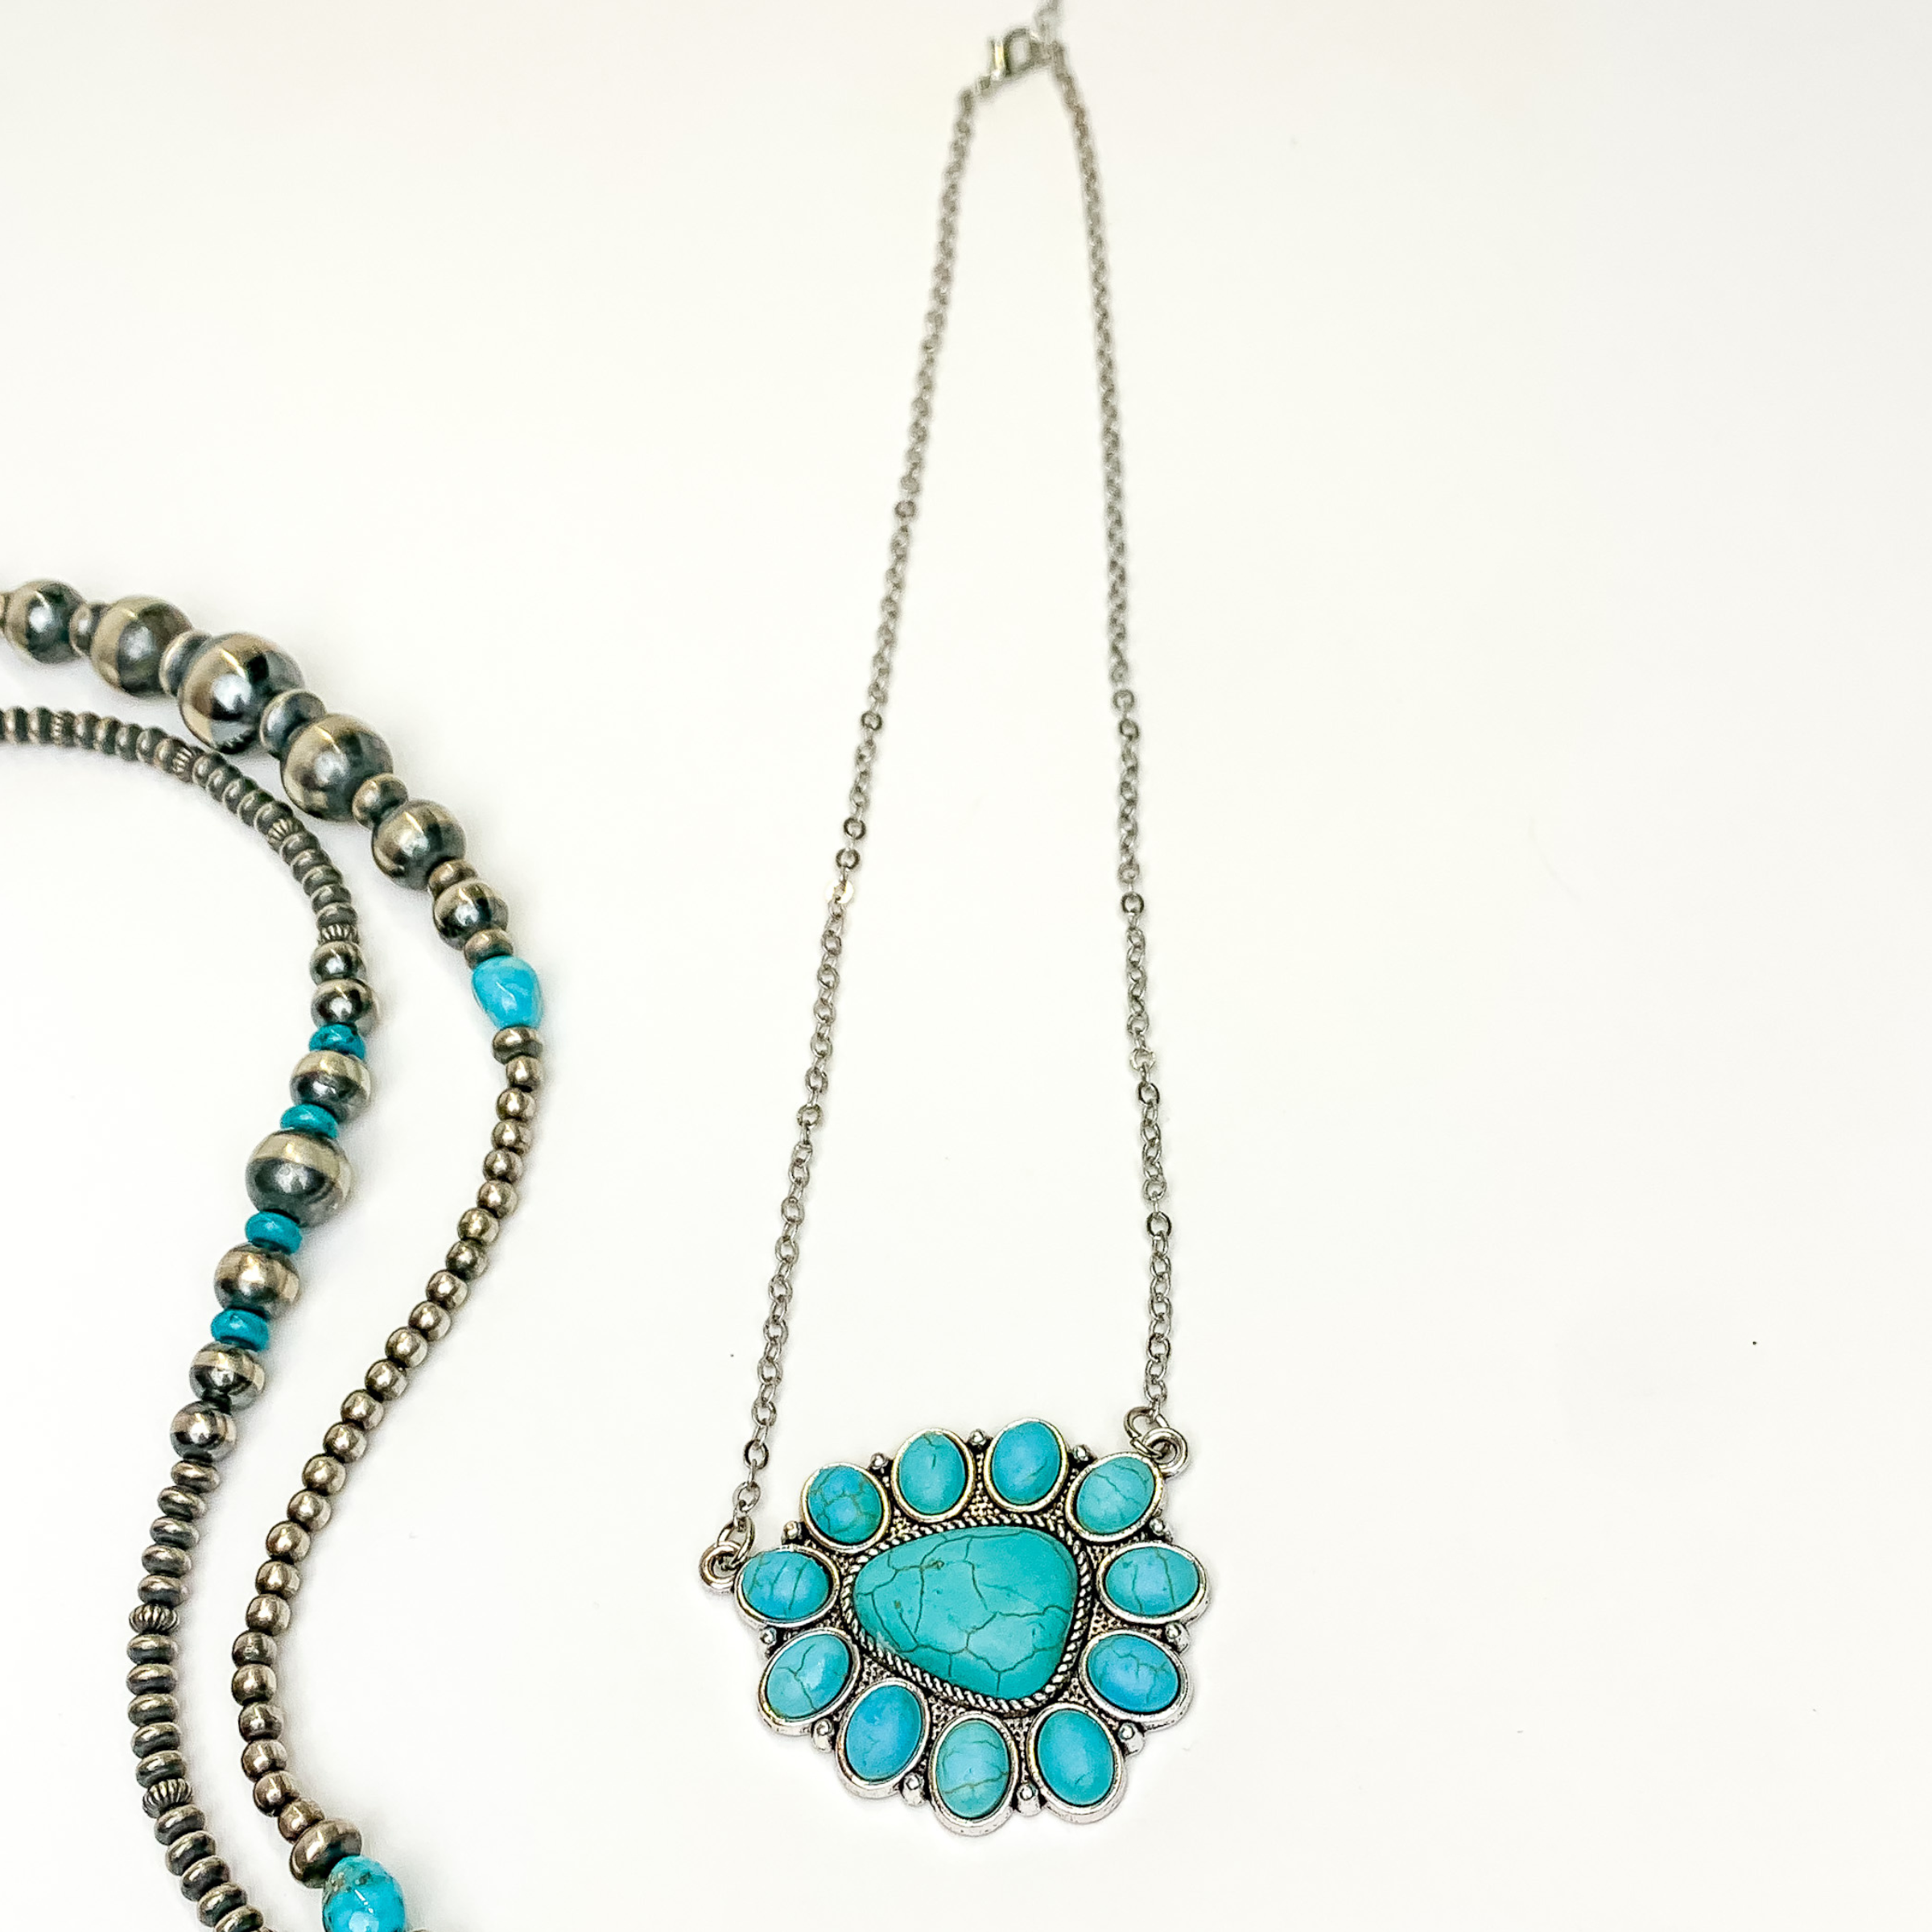 Silver chain necklace with triangular cluster pendant. This pendant is made up of turquoise stones. This necklace is pictured on an white background with silver and turquoise beads on the left side of the picture.